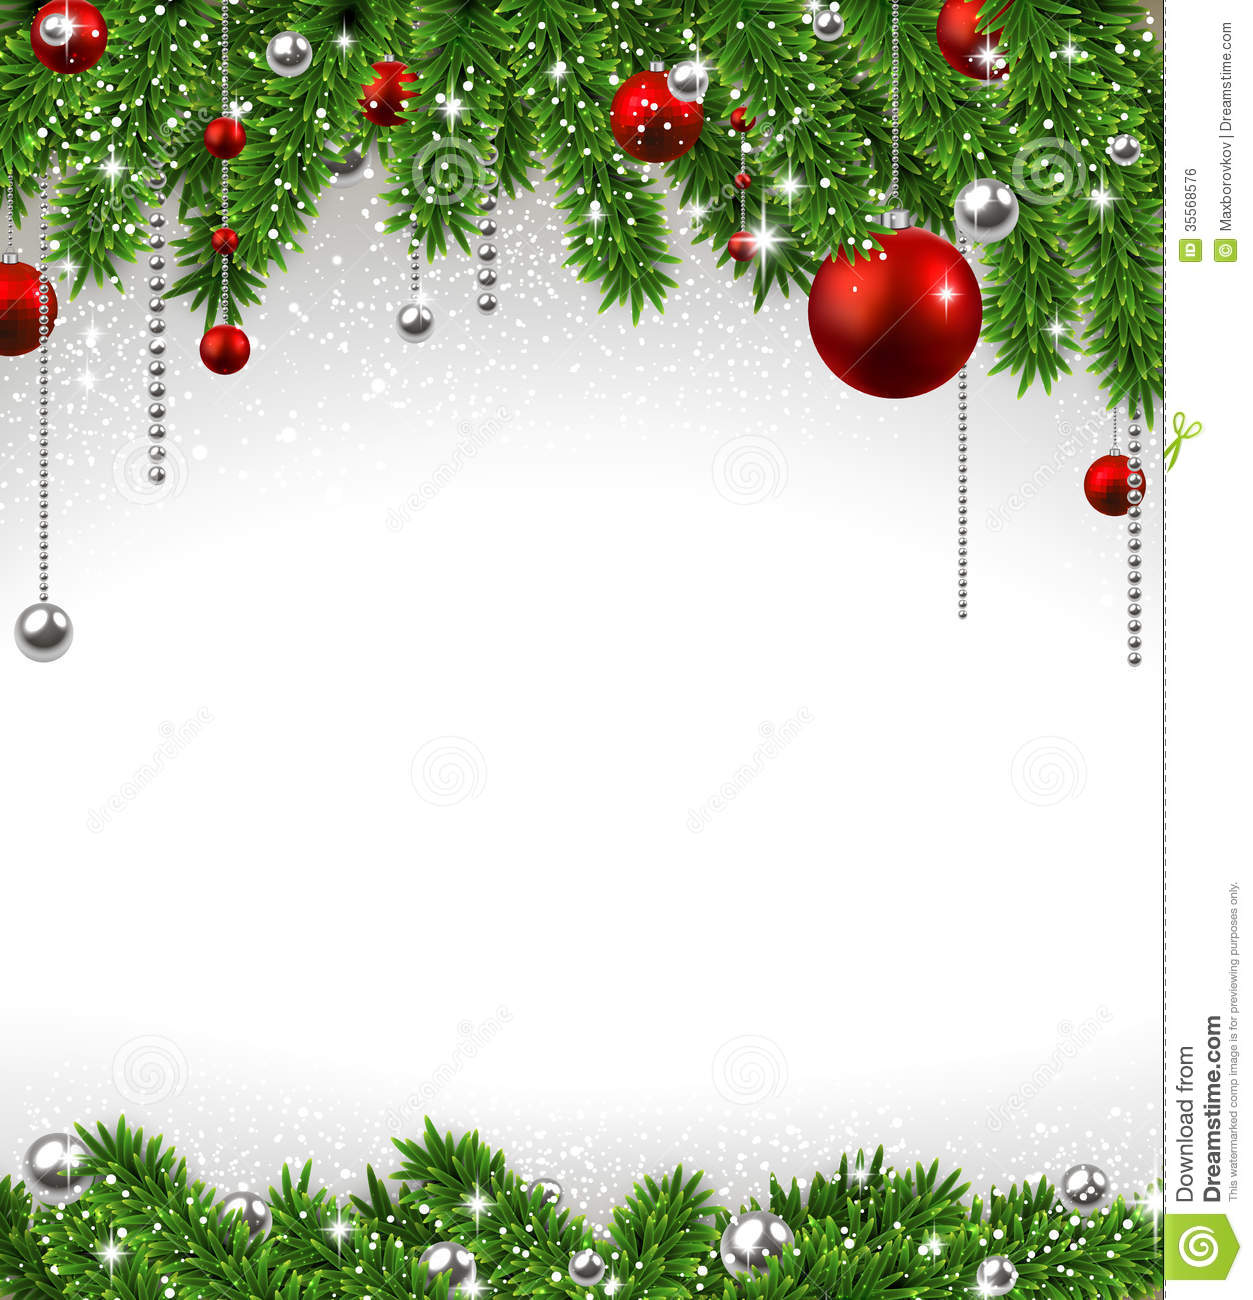 Christmas Background With Red Bauble And Merry Christmas Ribbon